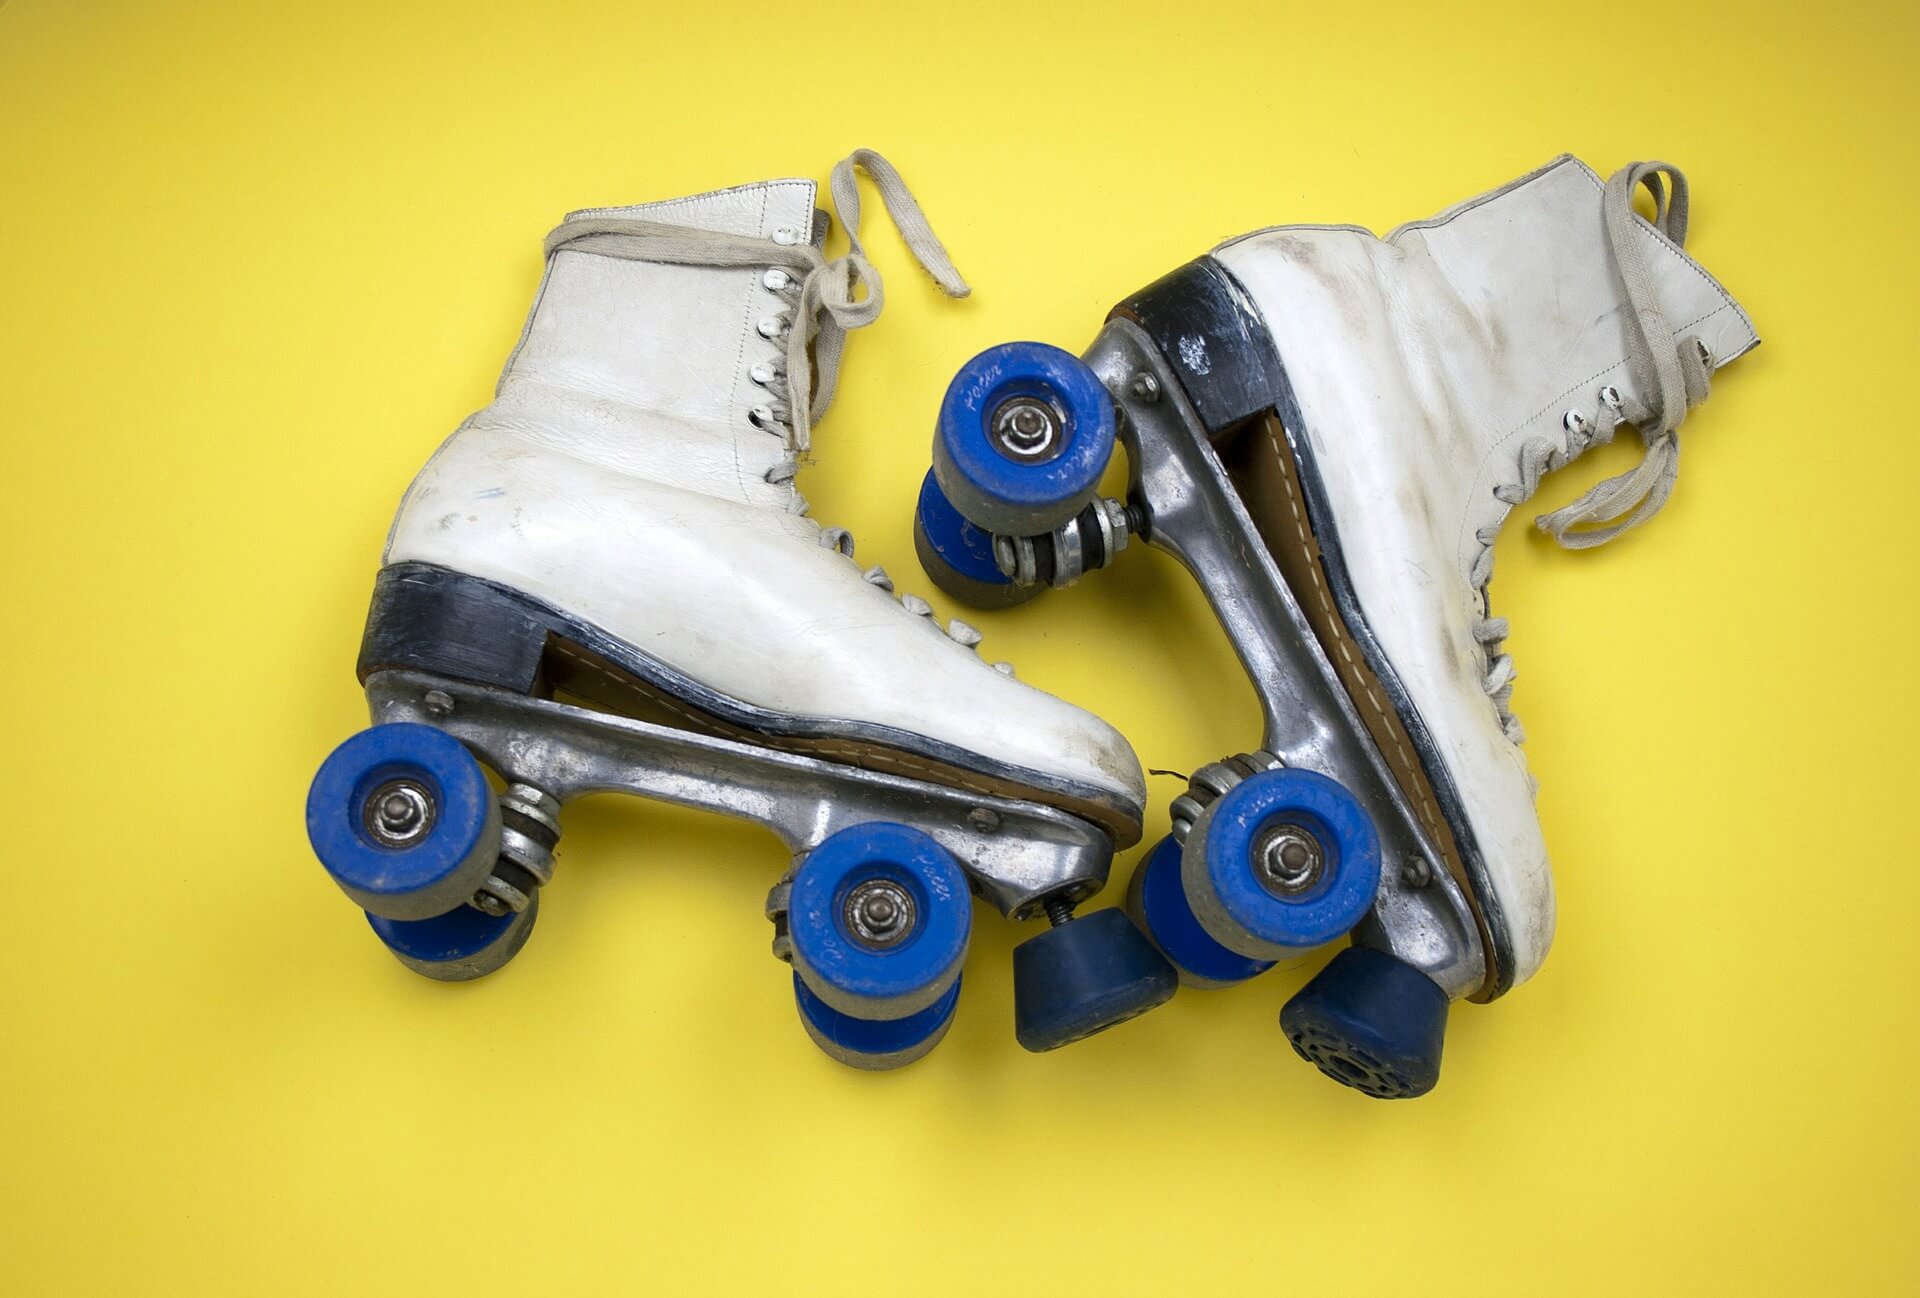 3 Simple Ways to Improve Your Roller Skating Game